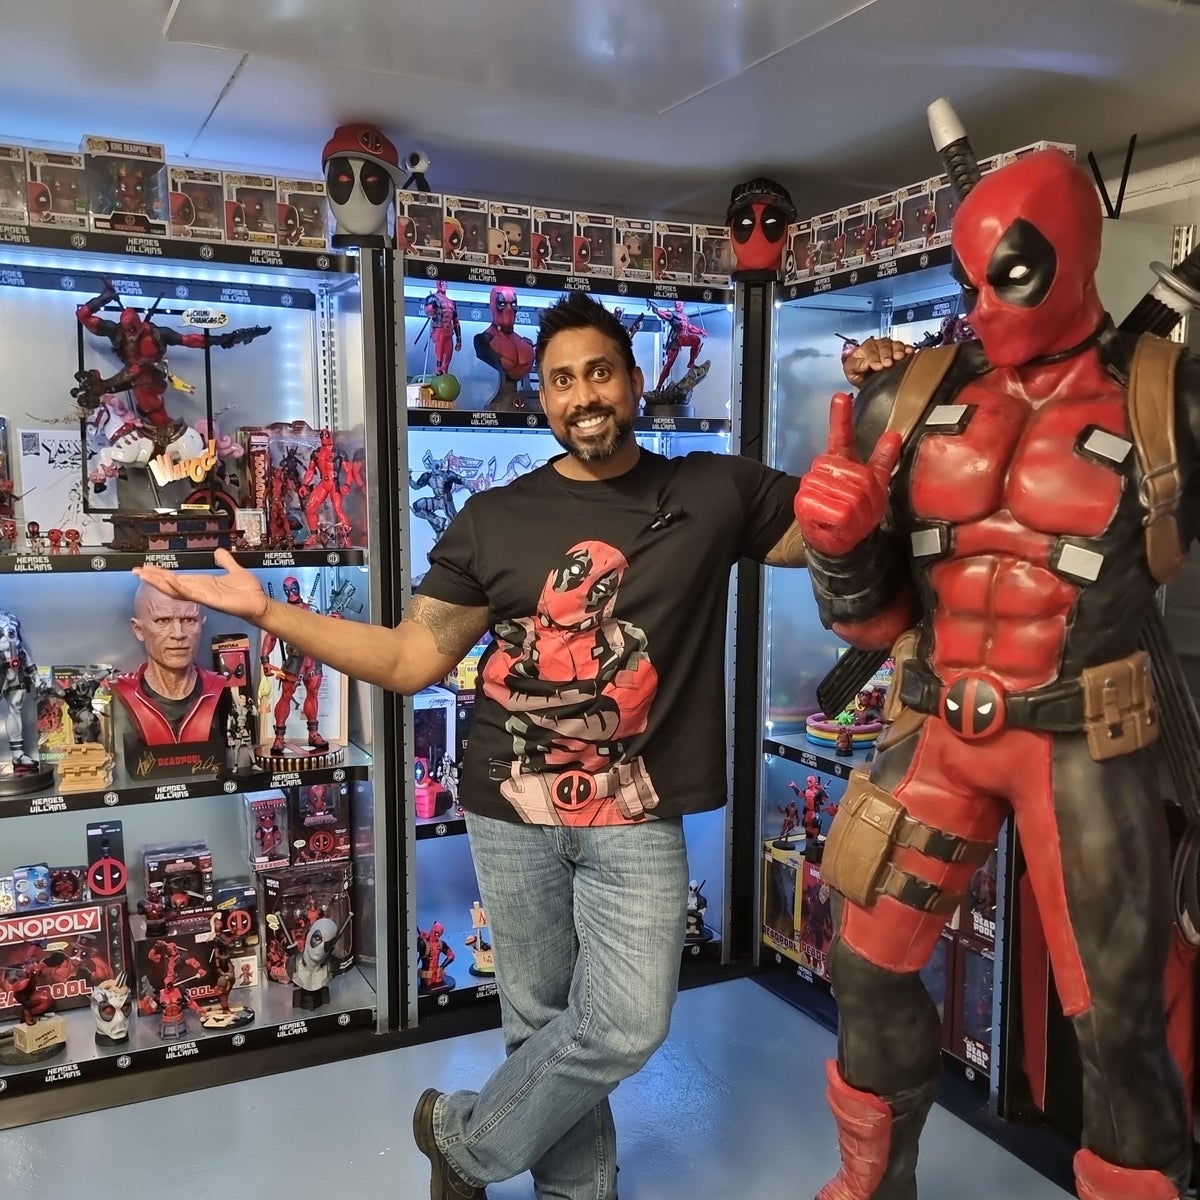 World record holder achieves 'lifelong dream' with most Deadpool